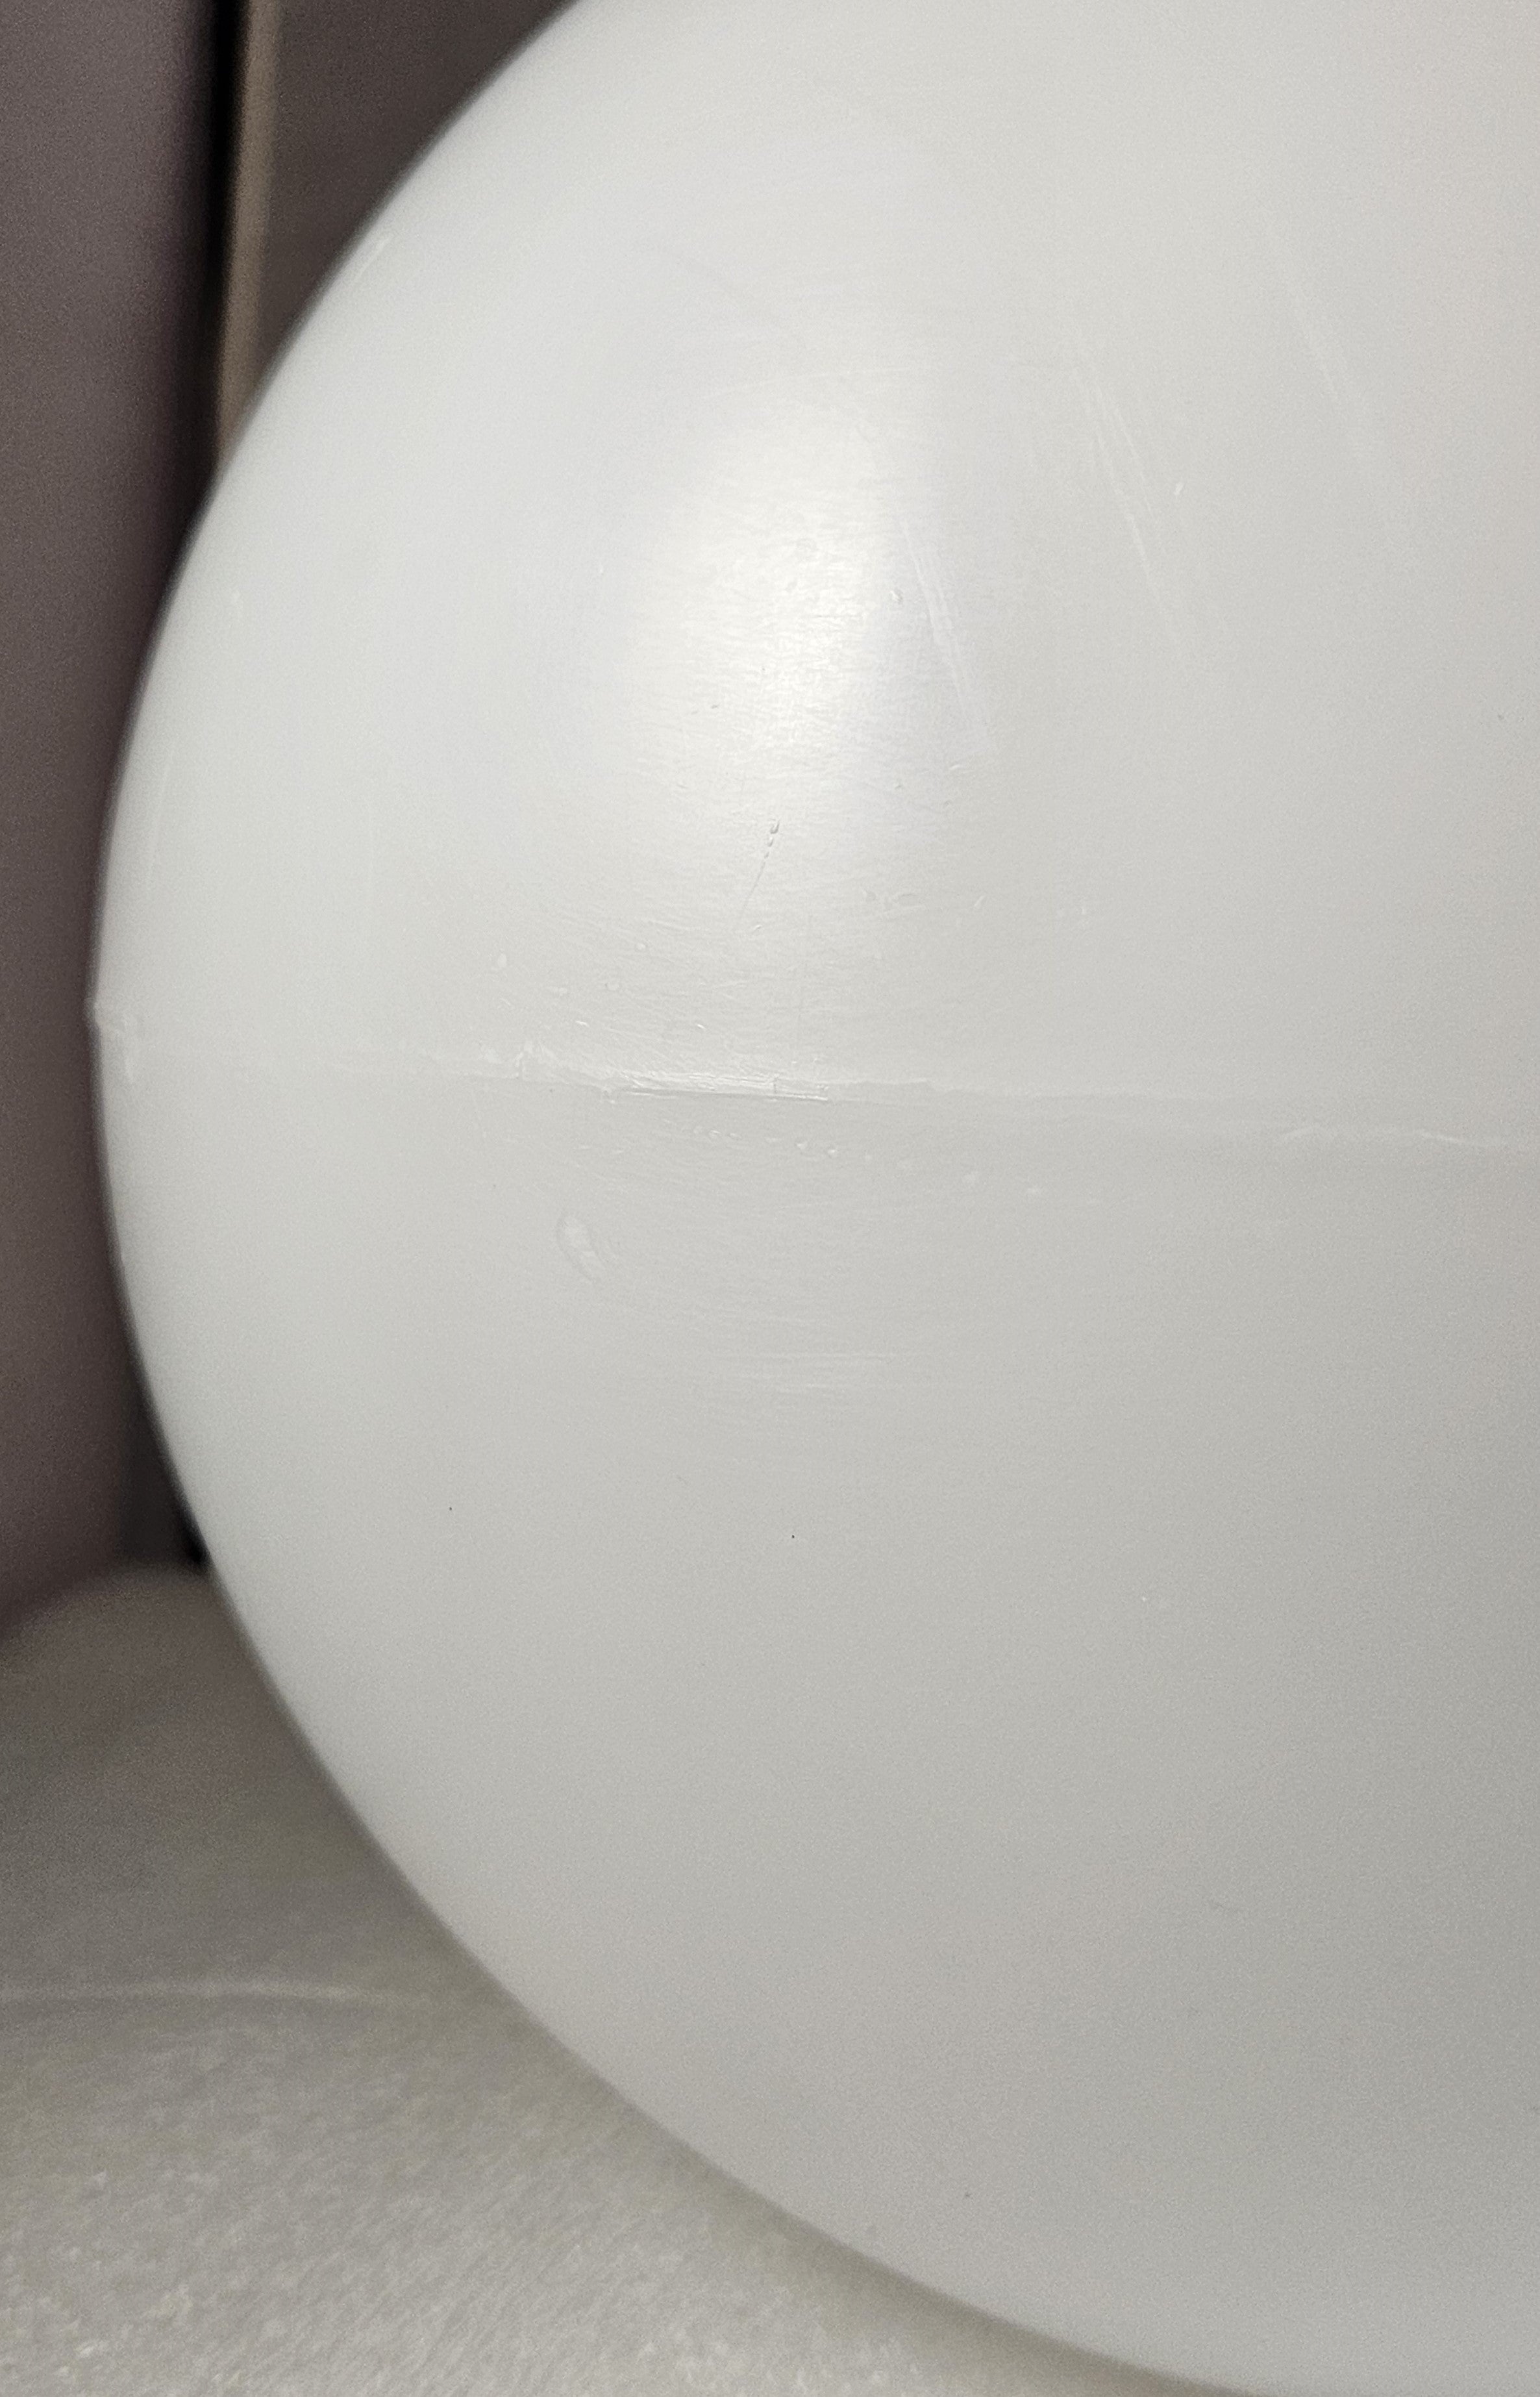 10" Neckless Plastic Globe with a 4" Hole (see more description & pictures)